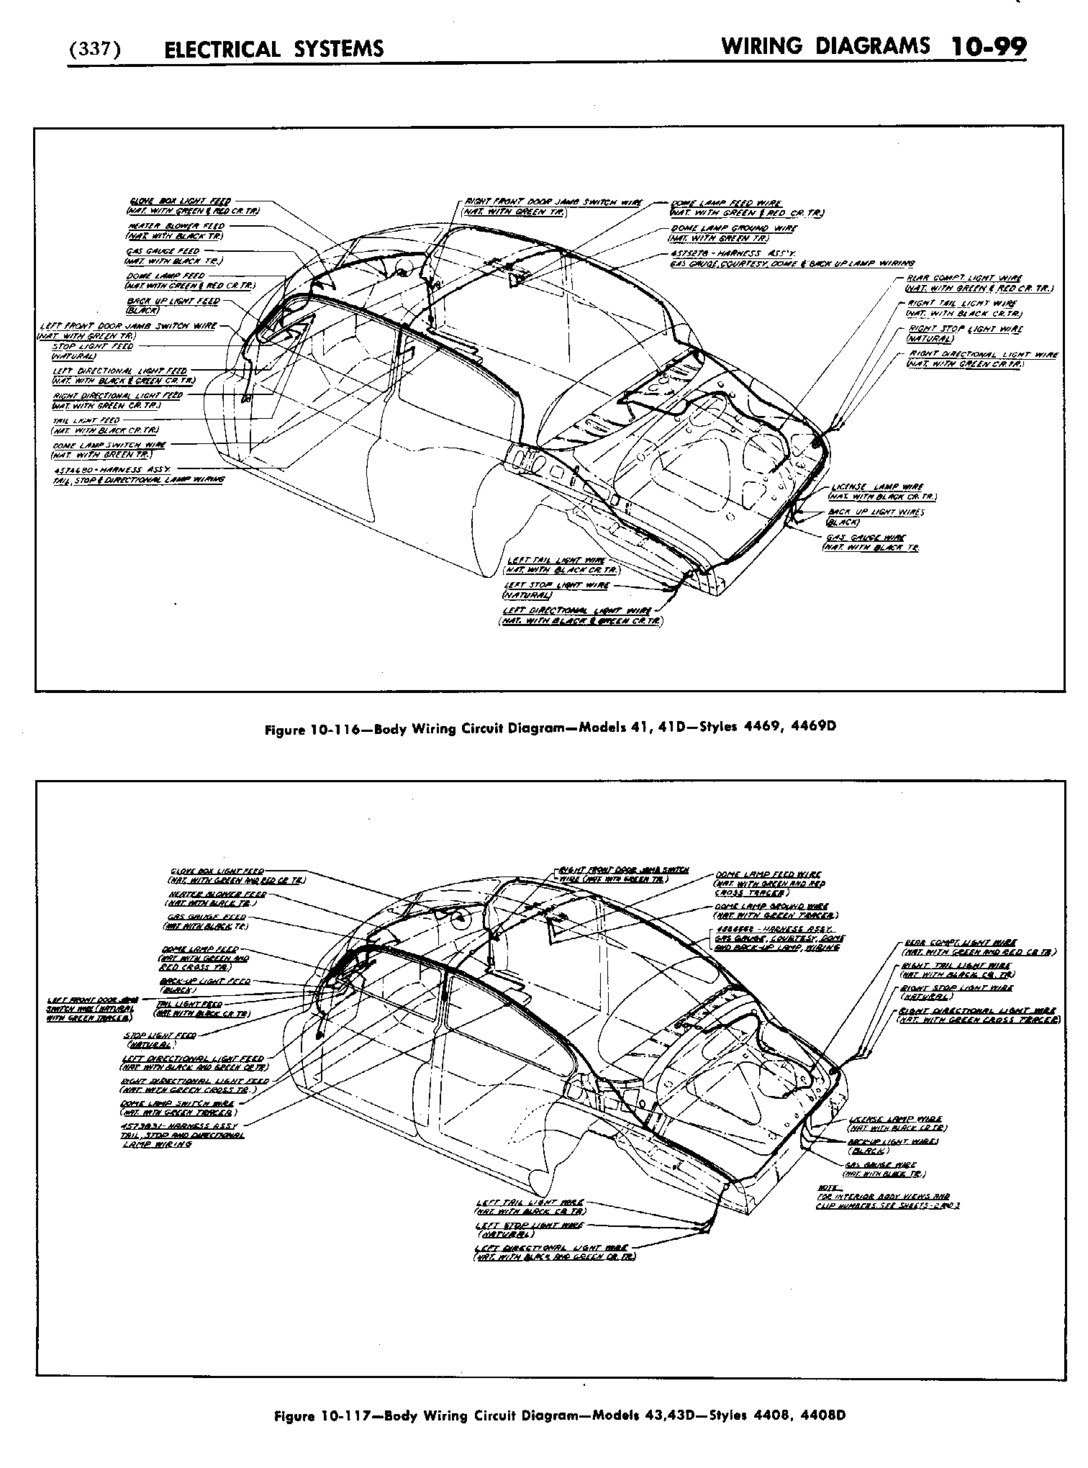 n_11 1950 Buick Shop Manual - Electrical Systems-099-099.jpg